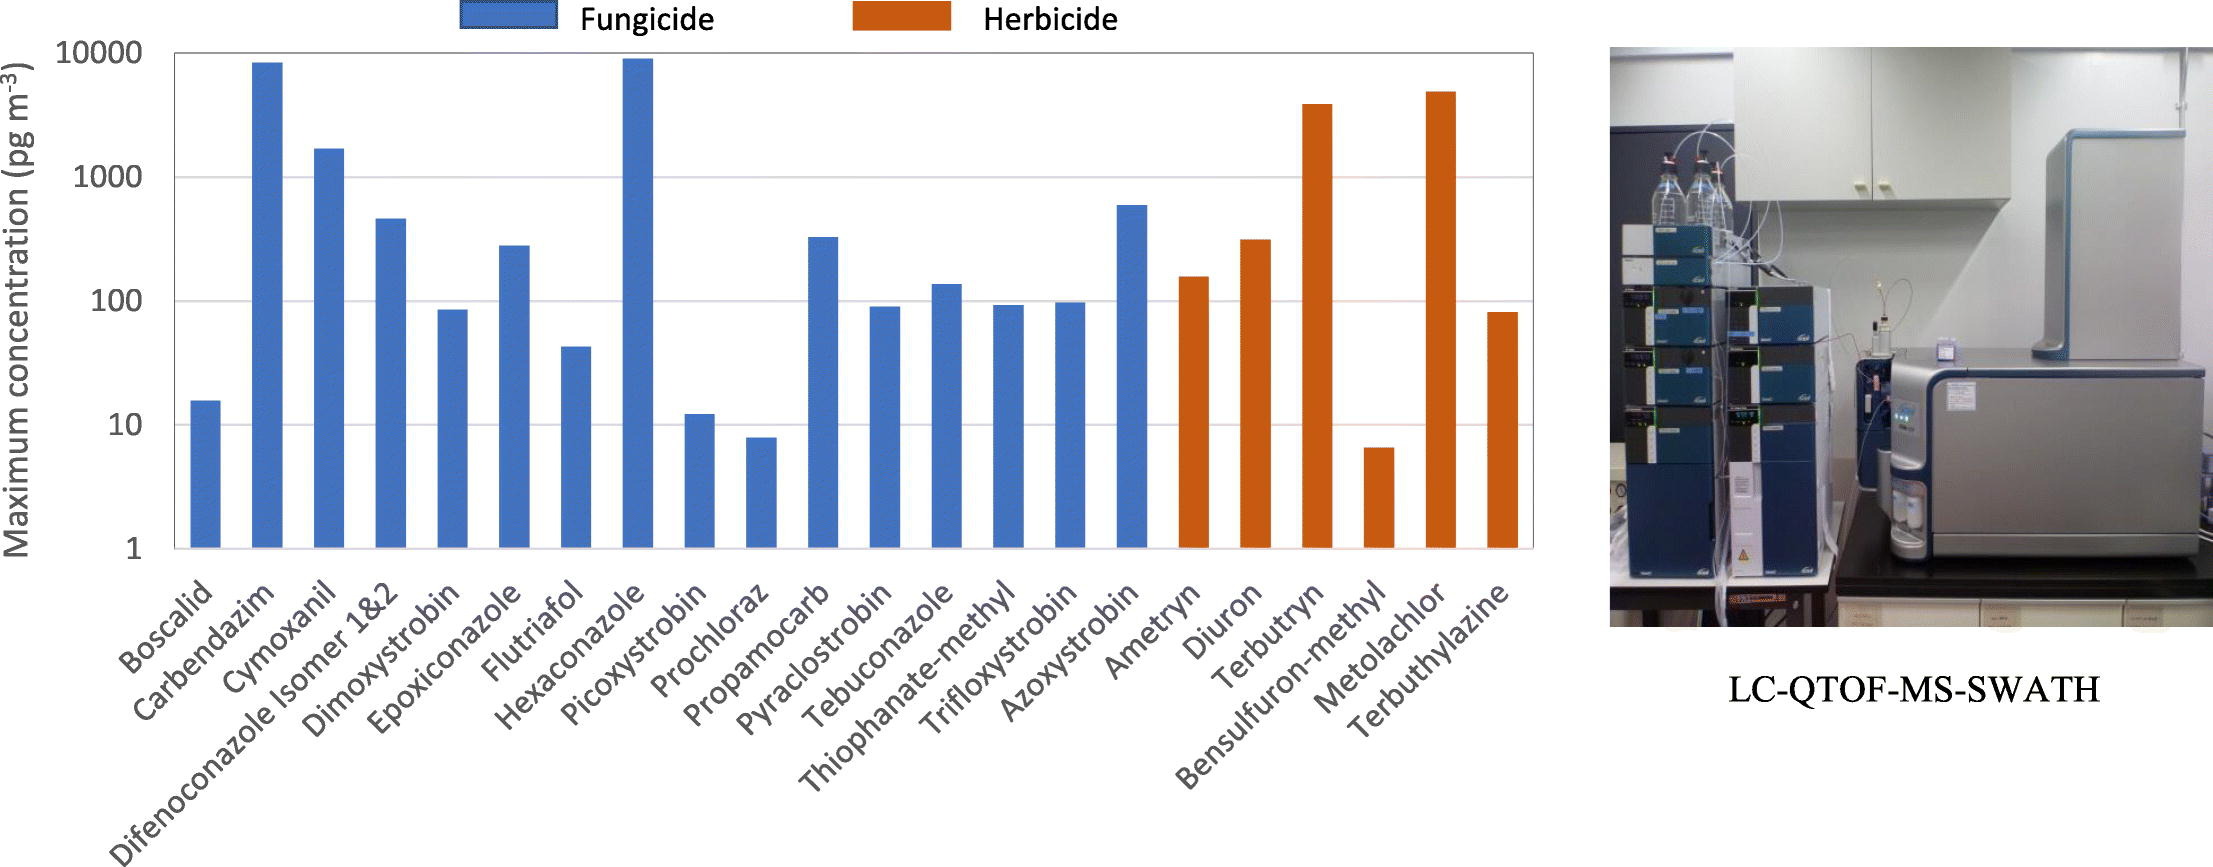 Occurrence and risk assessment of herbicides and fungicides in atmospheric particulate matter